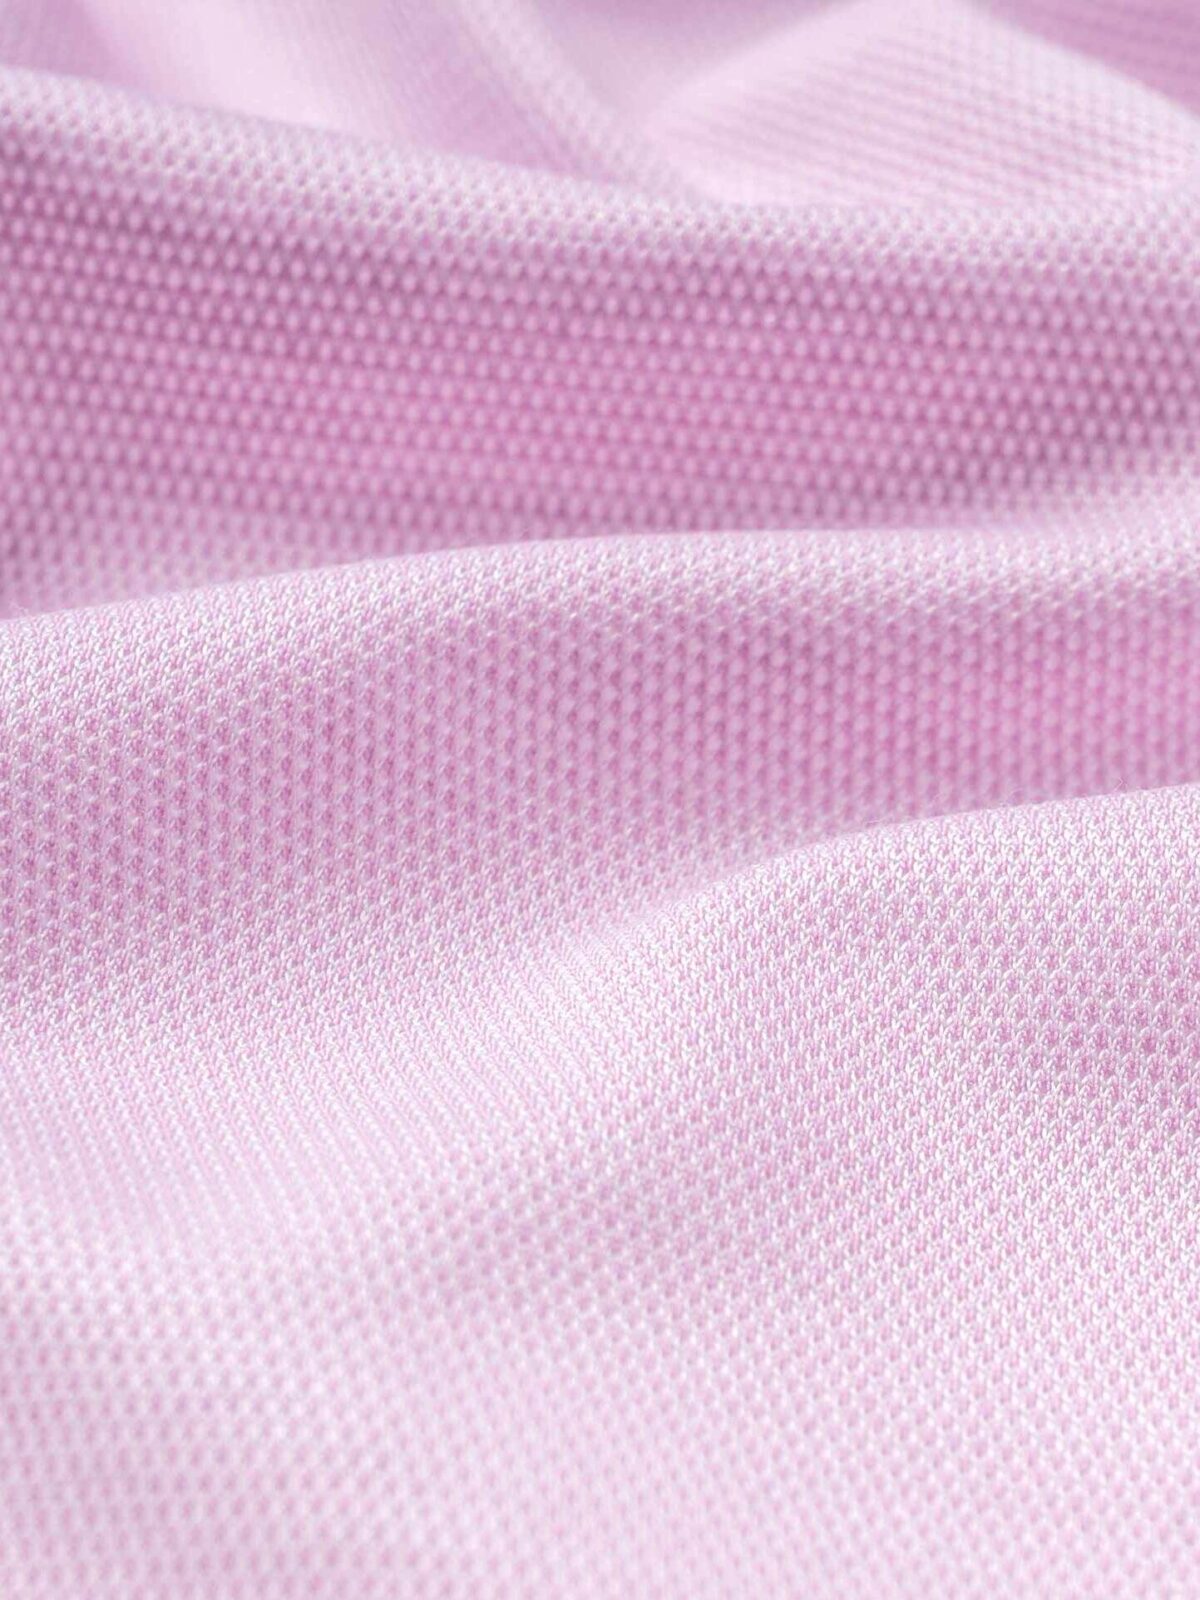 Pink Coolmax Performance Knit Shirts by Proper Cloth